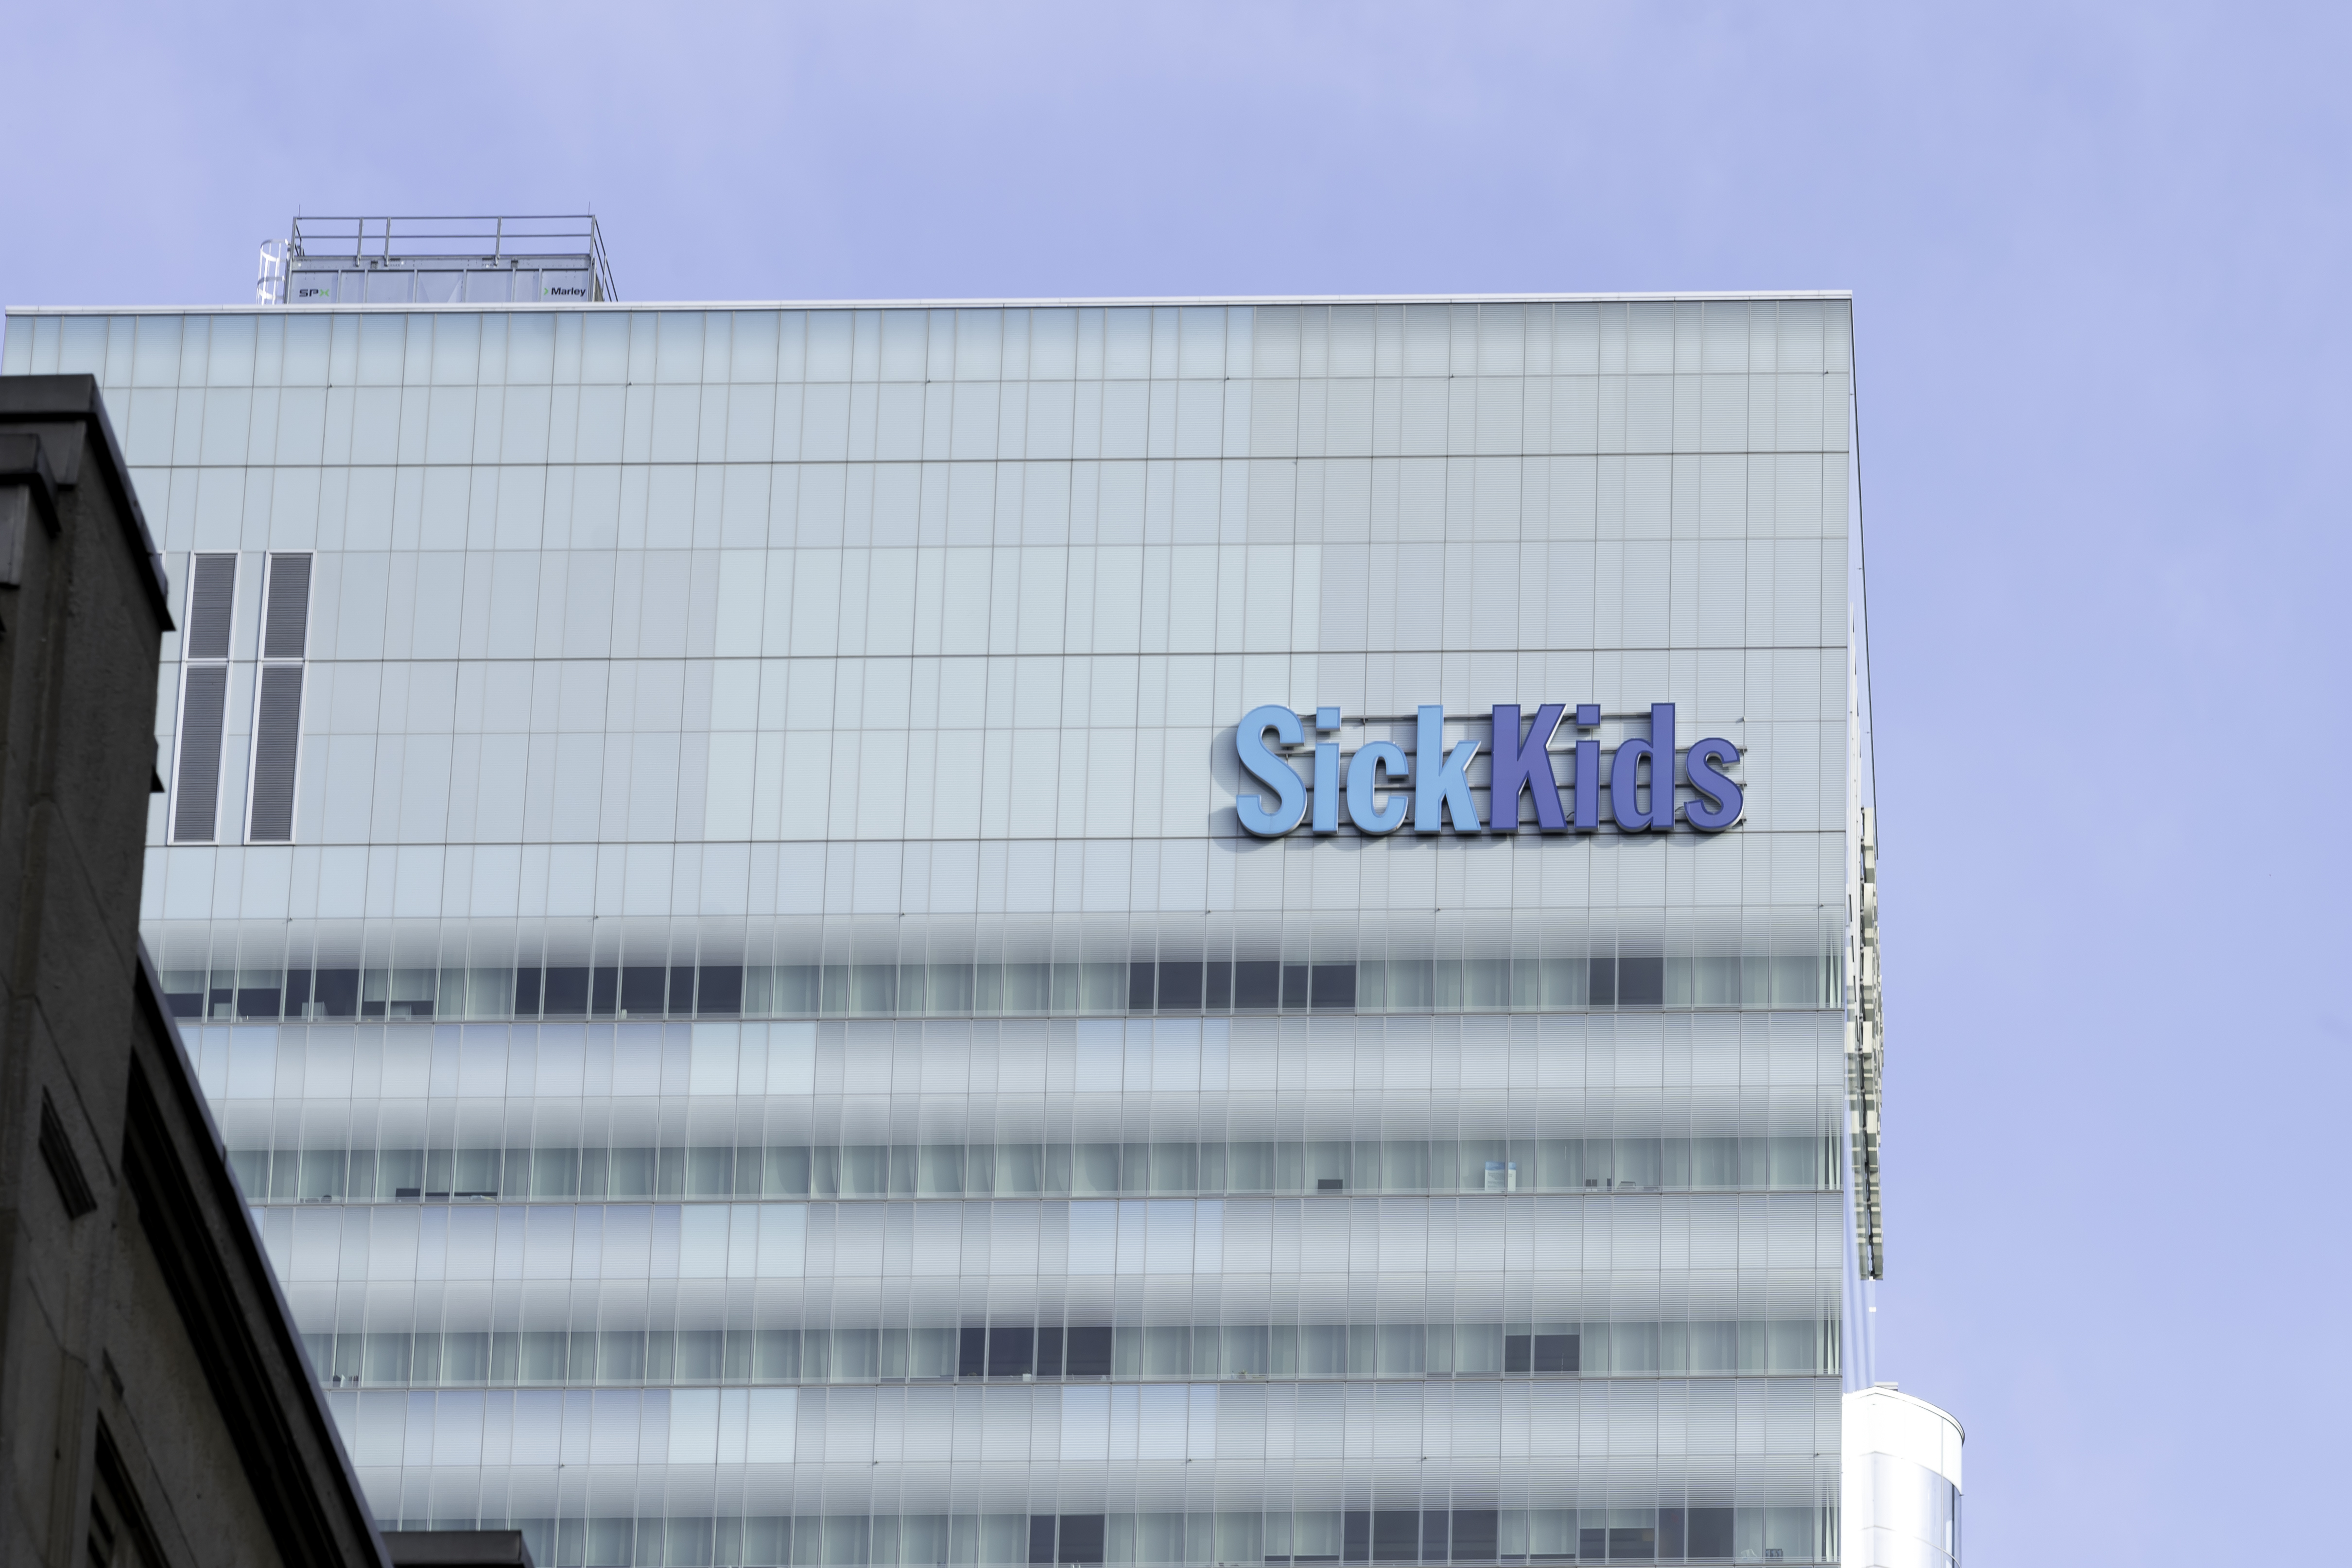 LockBit ransomware gang apologizes for SickKids hospital attack and offers free decryptor